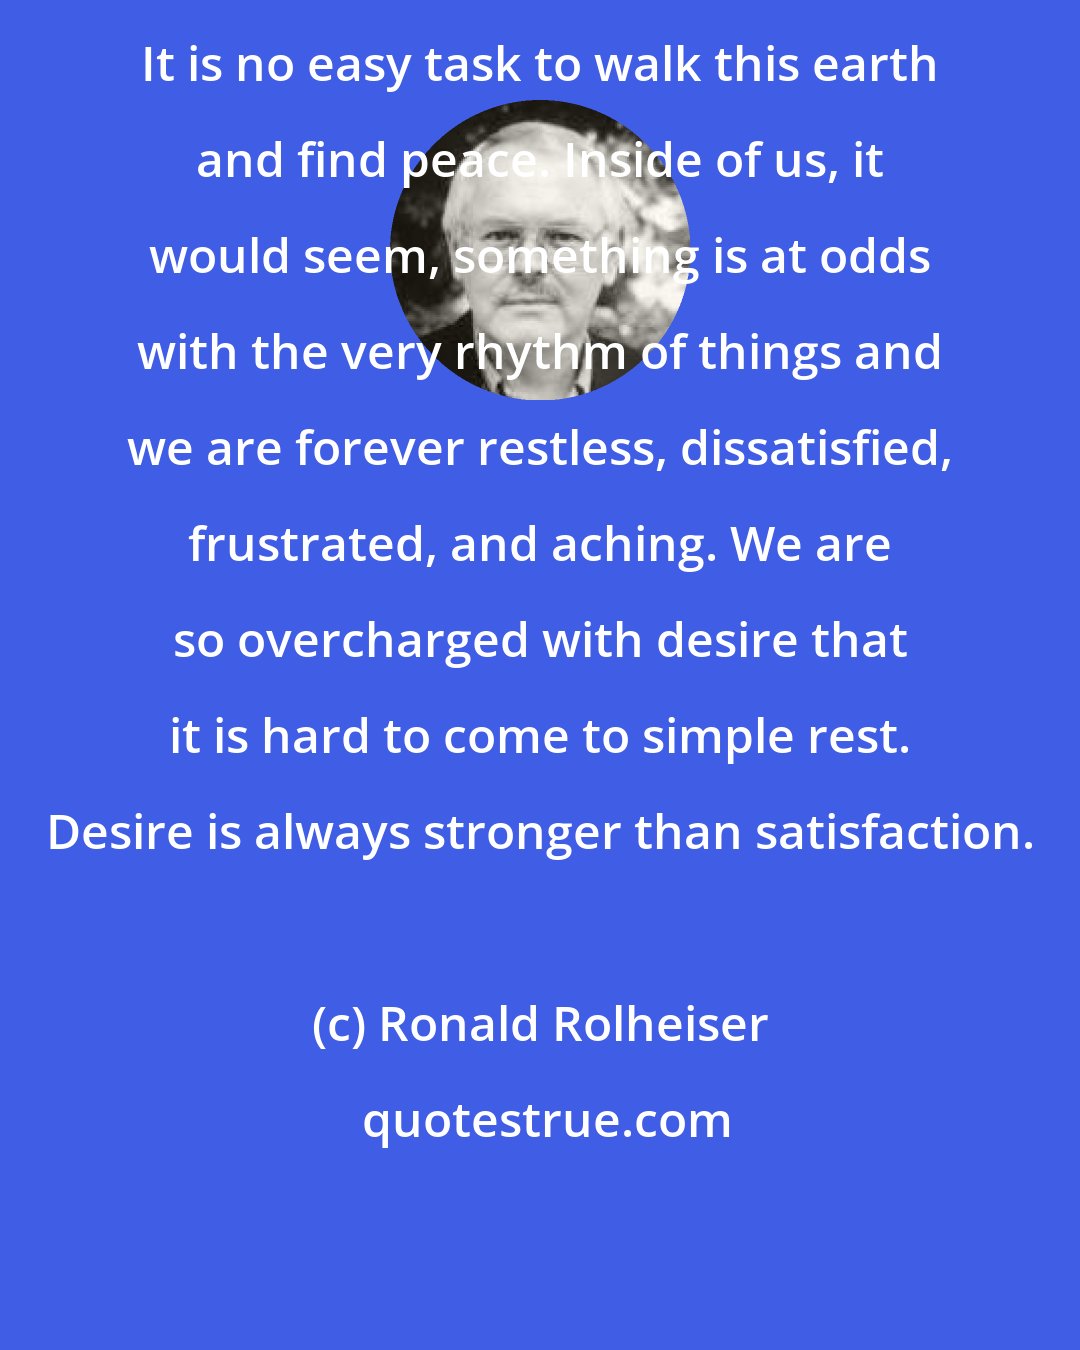 Ronald Rolheiser: It is no easy task to walk this earth and find peace. Inside of us, it would seem, something is at odds with the very rhythm of things and we are forever restless, dissatisfied, frustrated, and aching. We are so overcharged with desire that it is hard to come to simple rest. Desire is always stronger than satisfaction.